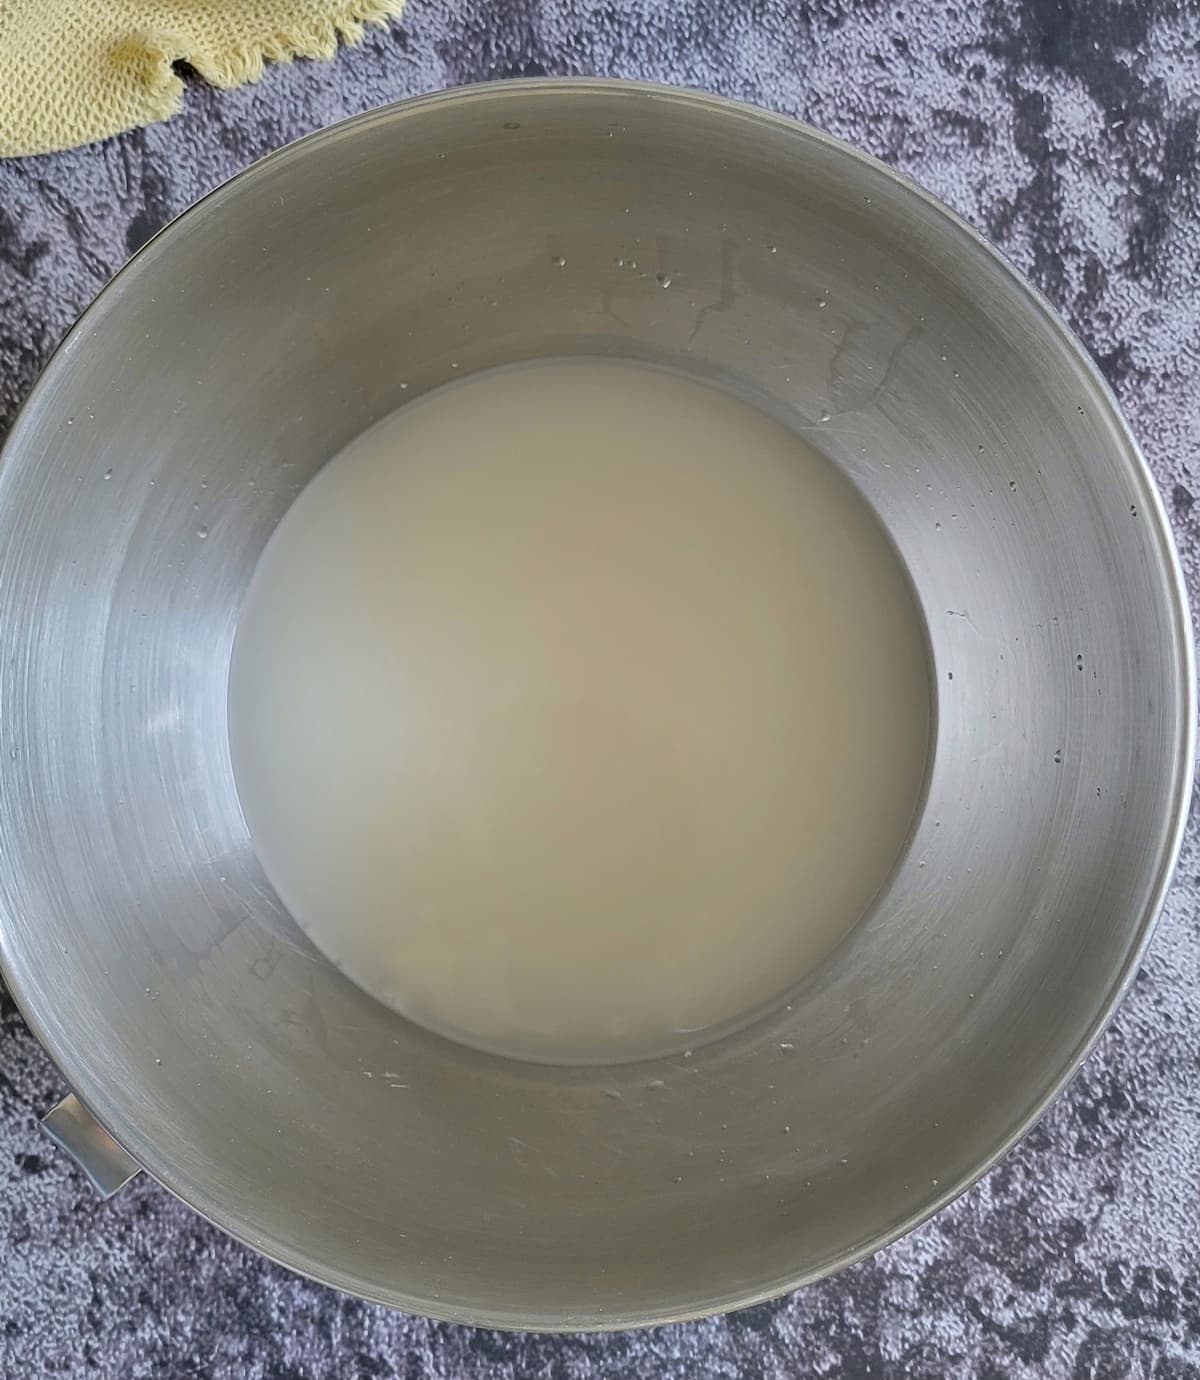 yeast proofing in water in a bowl